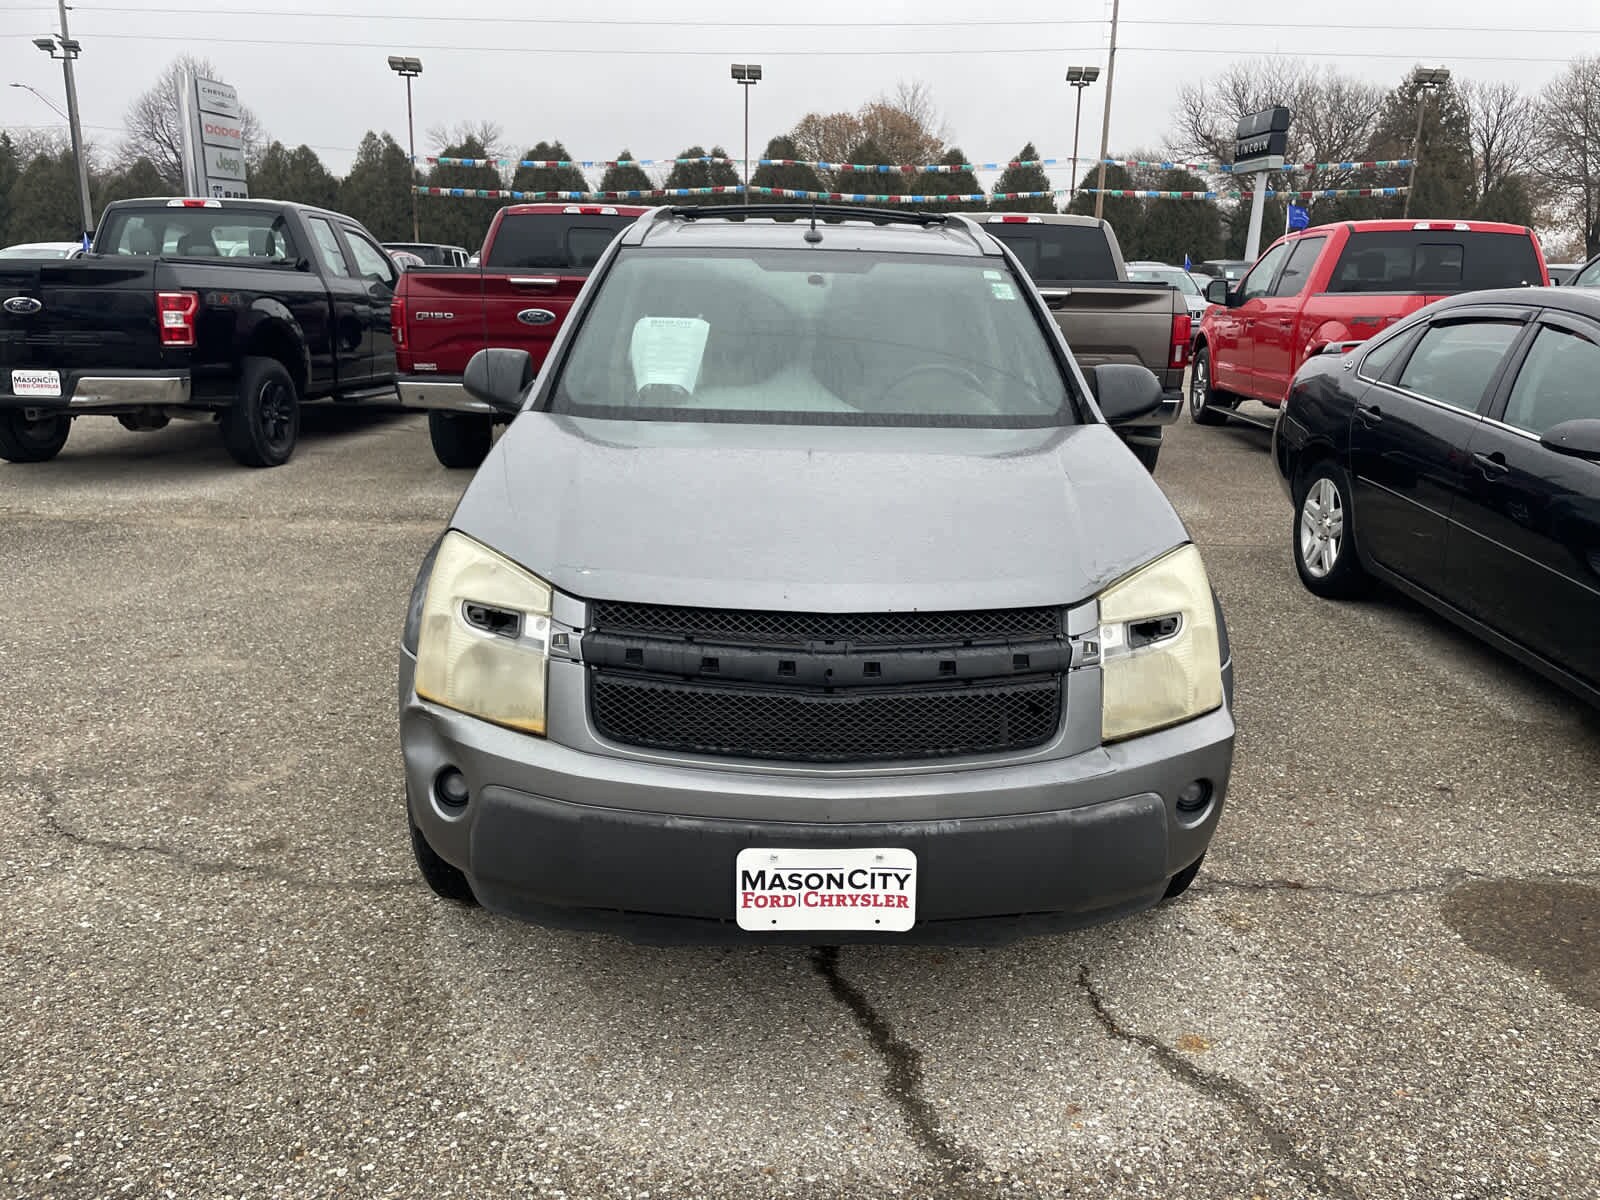 Used 2005 Chevrolet Equinox LT with VIN 2CNDL73FX56173875 for sale in Mason City, IA